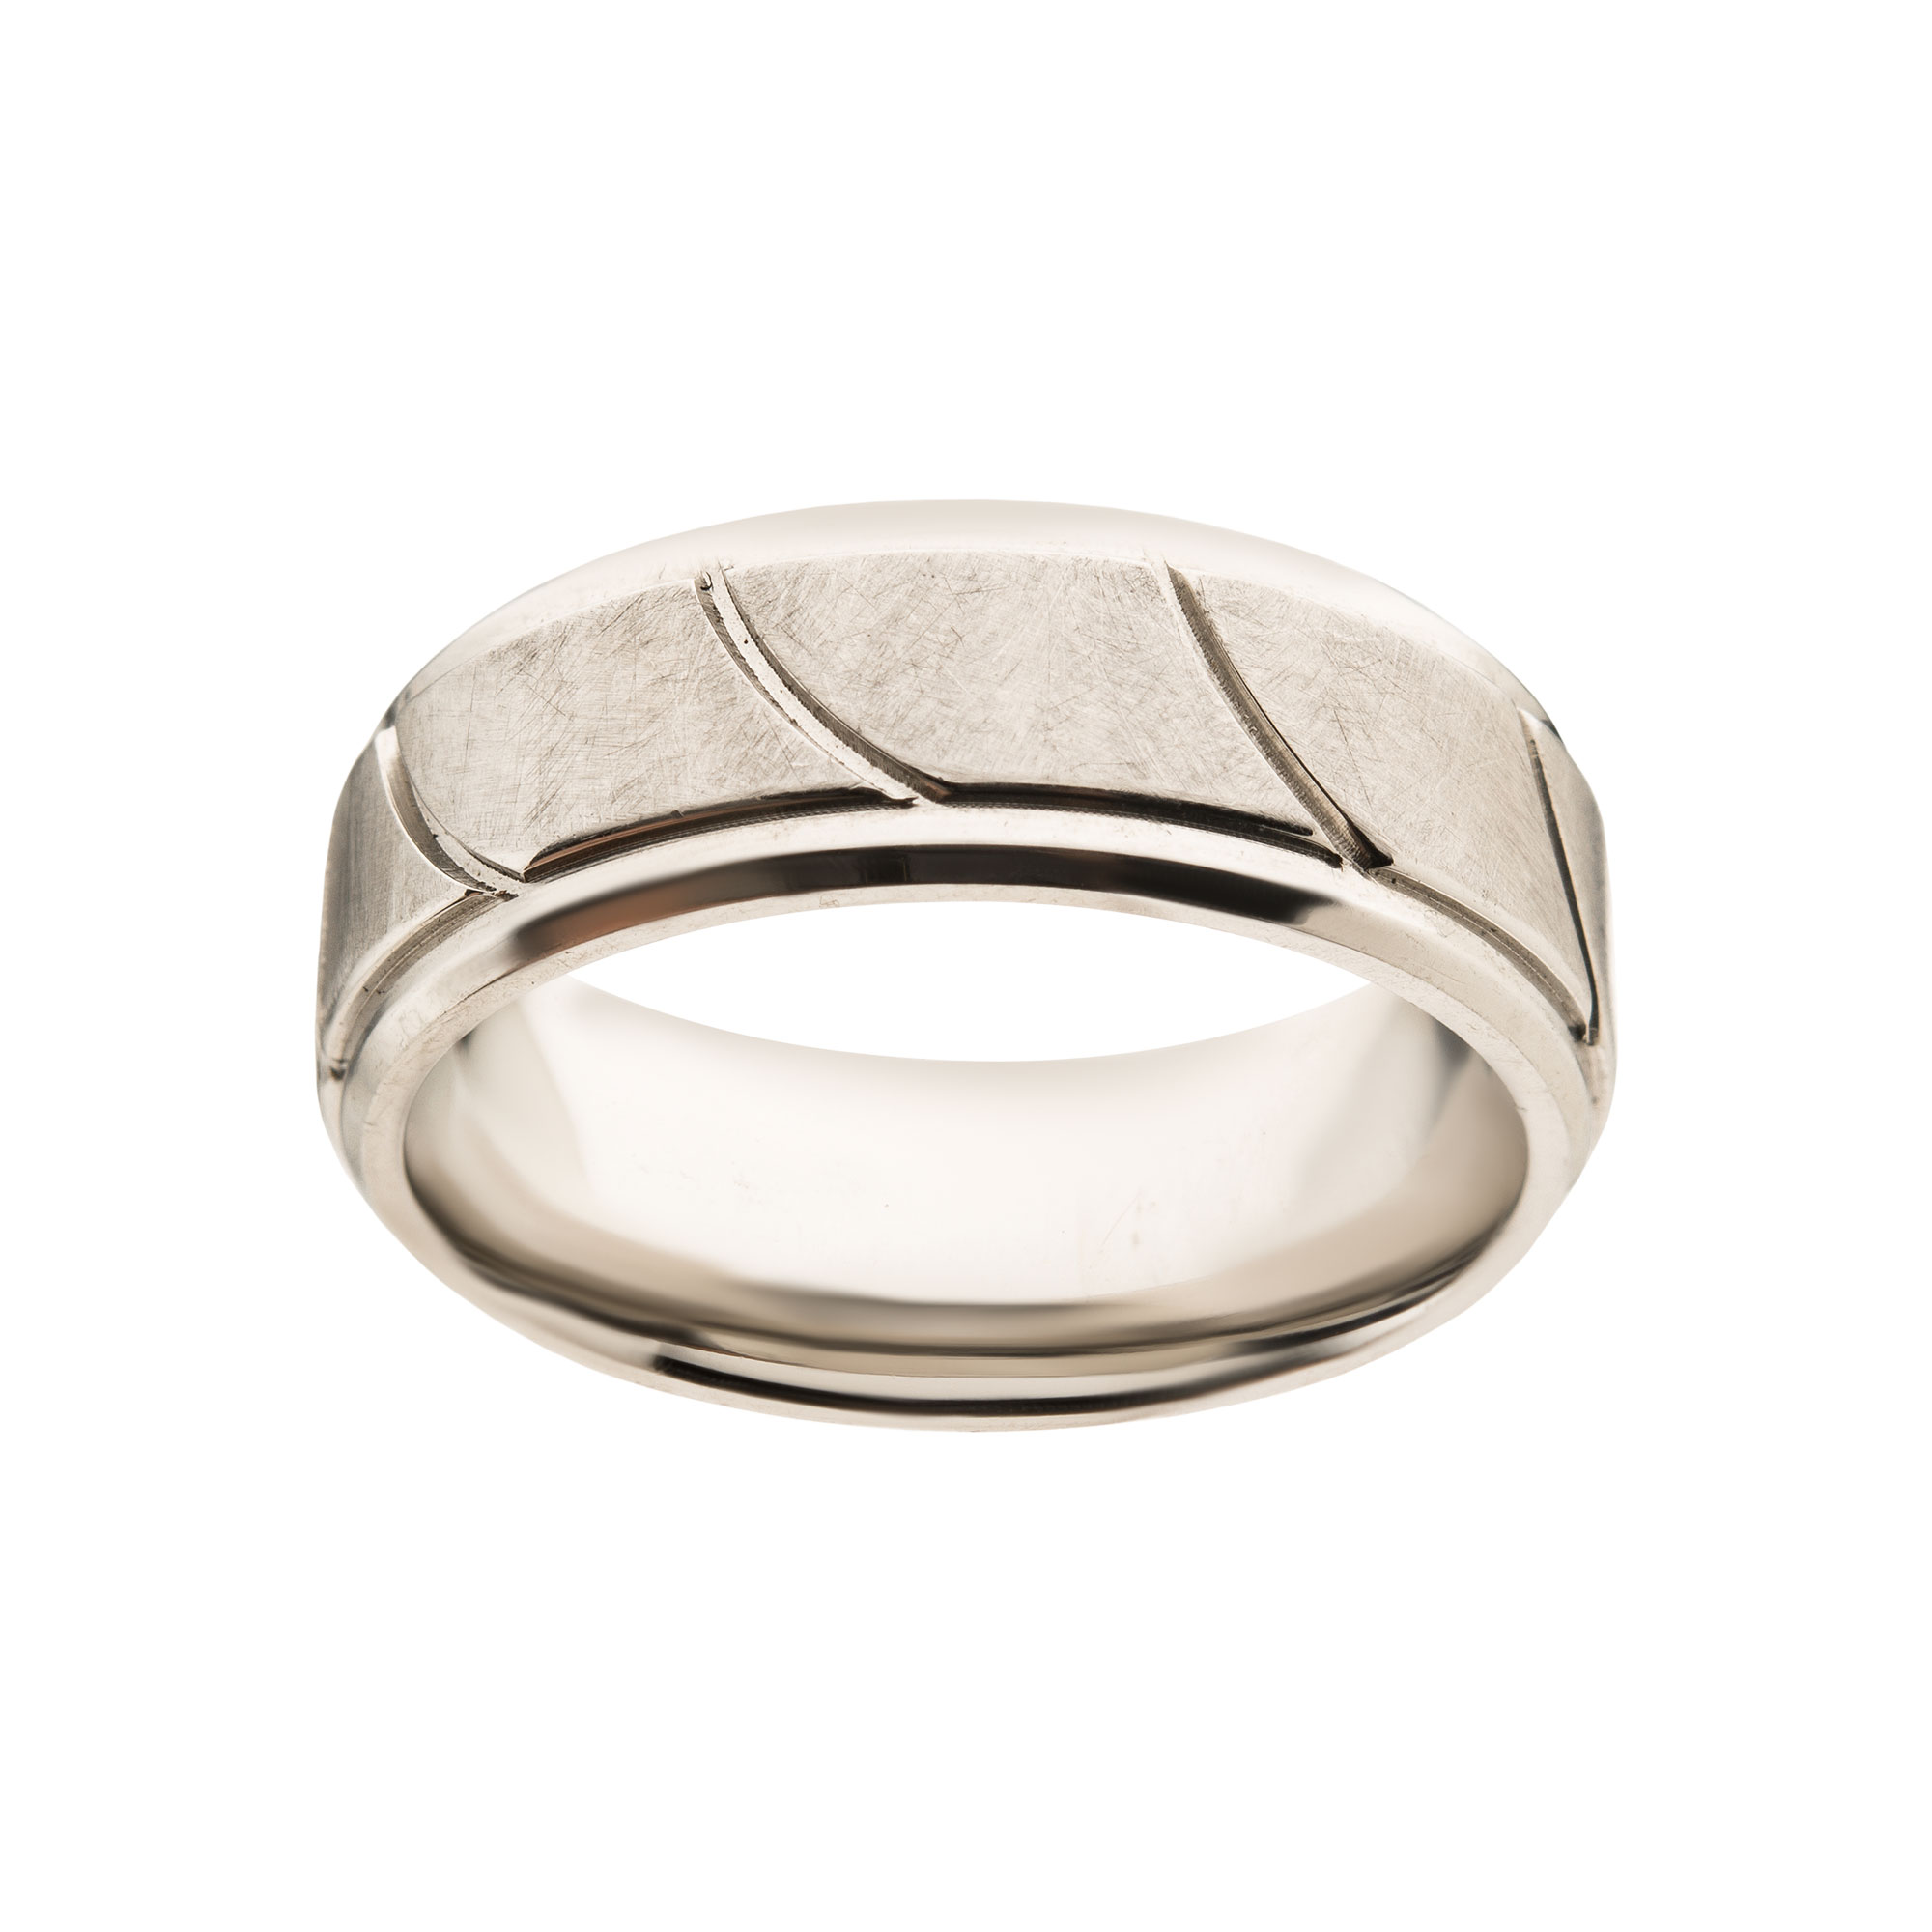 Steel Brushed with Grooves Beveled Ring Image 2 Midtown Diamonds Reno, NV